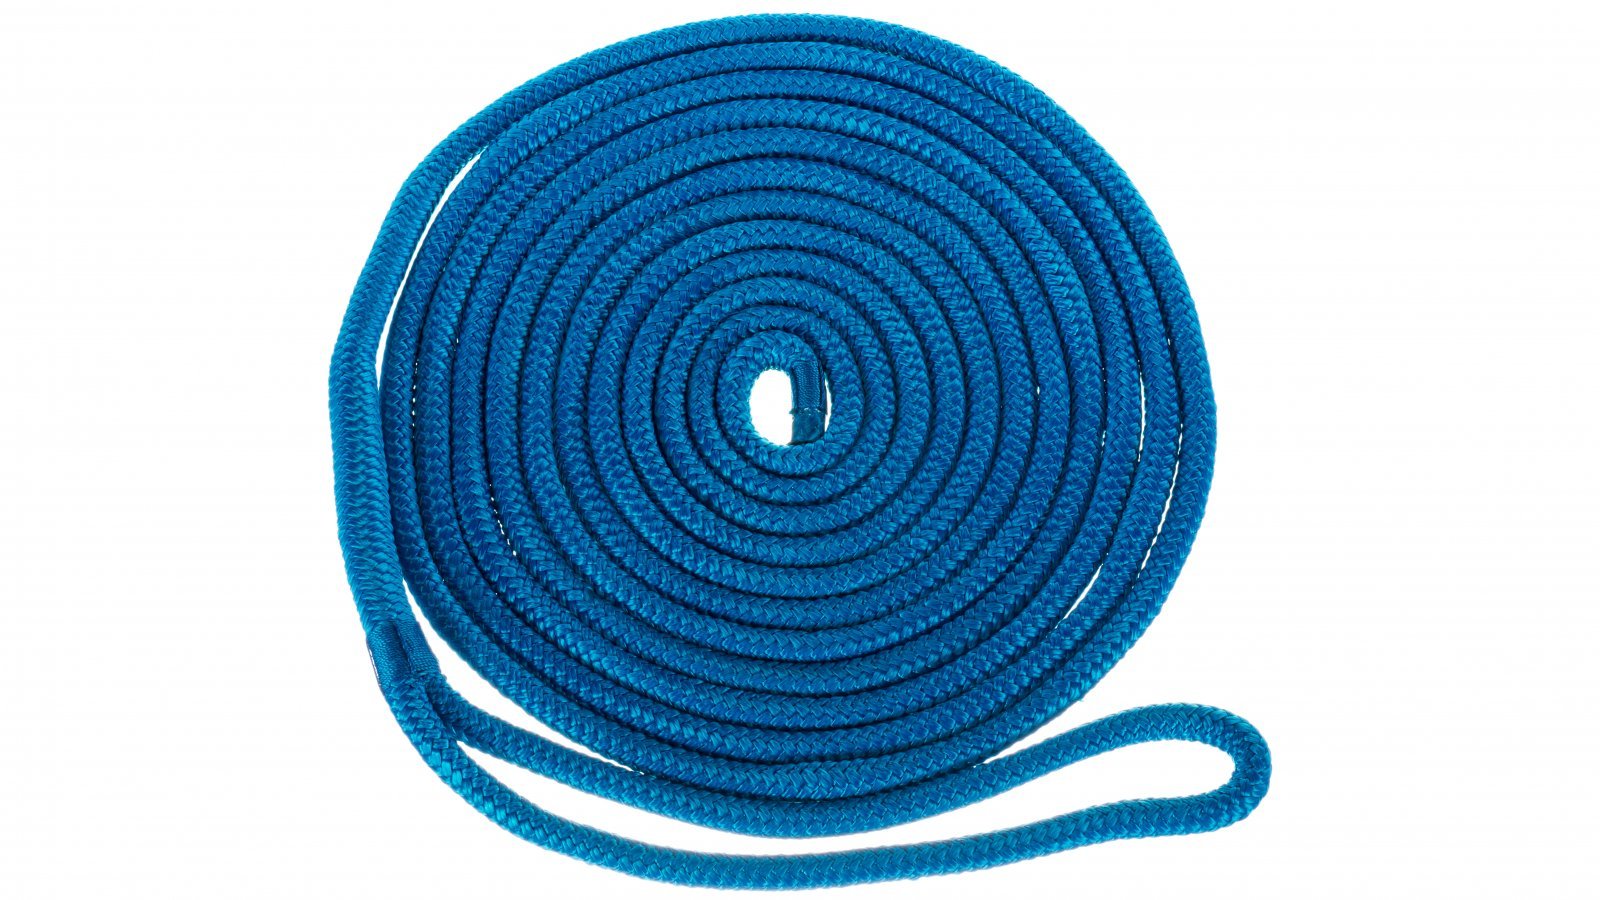 Nylon Double Braid Dock Line Kits ropes - Lowest prices, free shipping